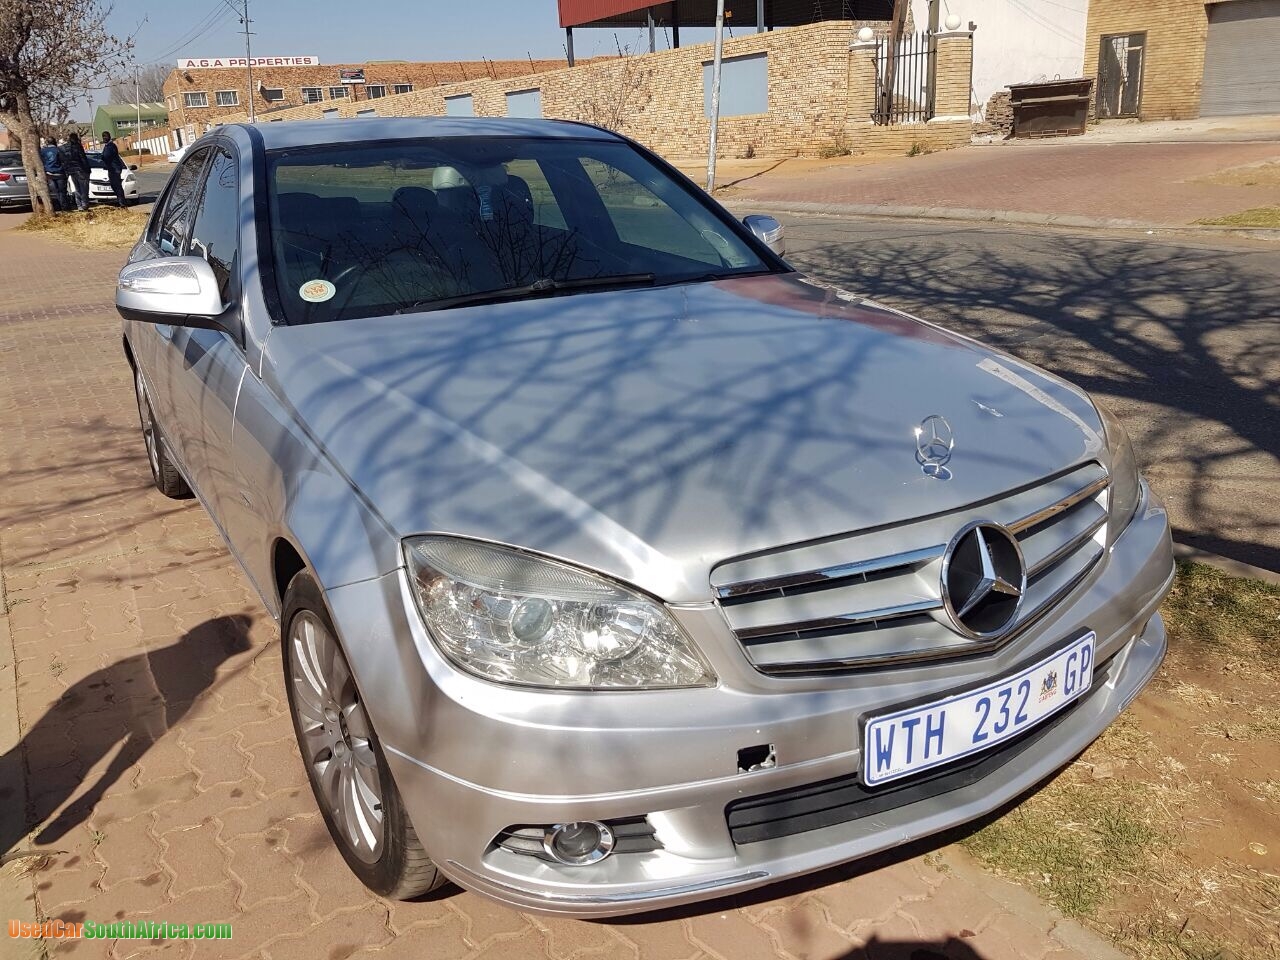 2009 Mercedes Benz C200 used car for sale in Johannesburg City Gauteng ...